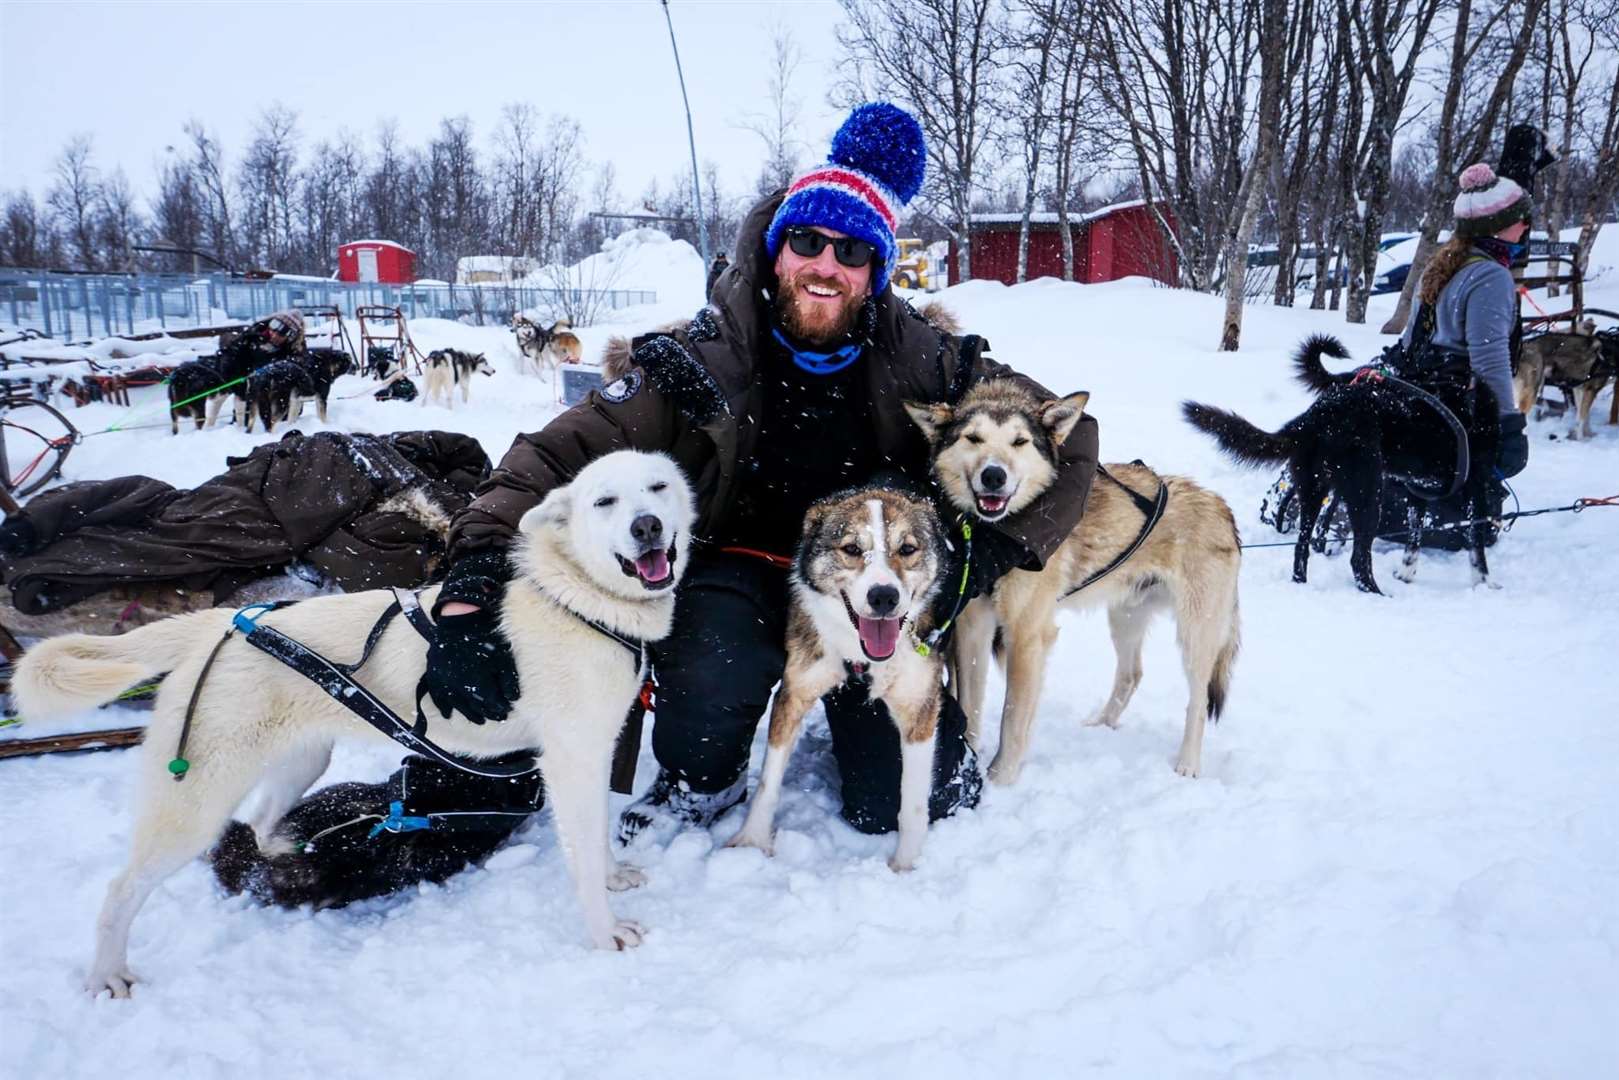 Dave with his dogs.